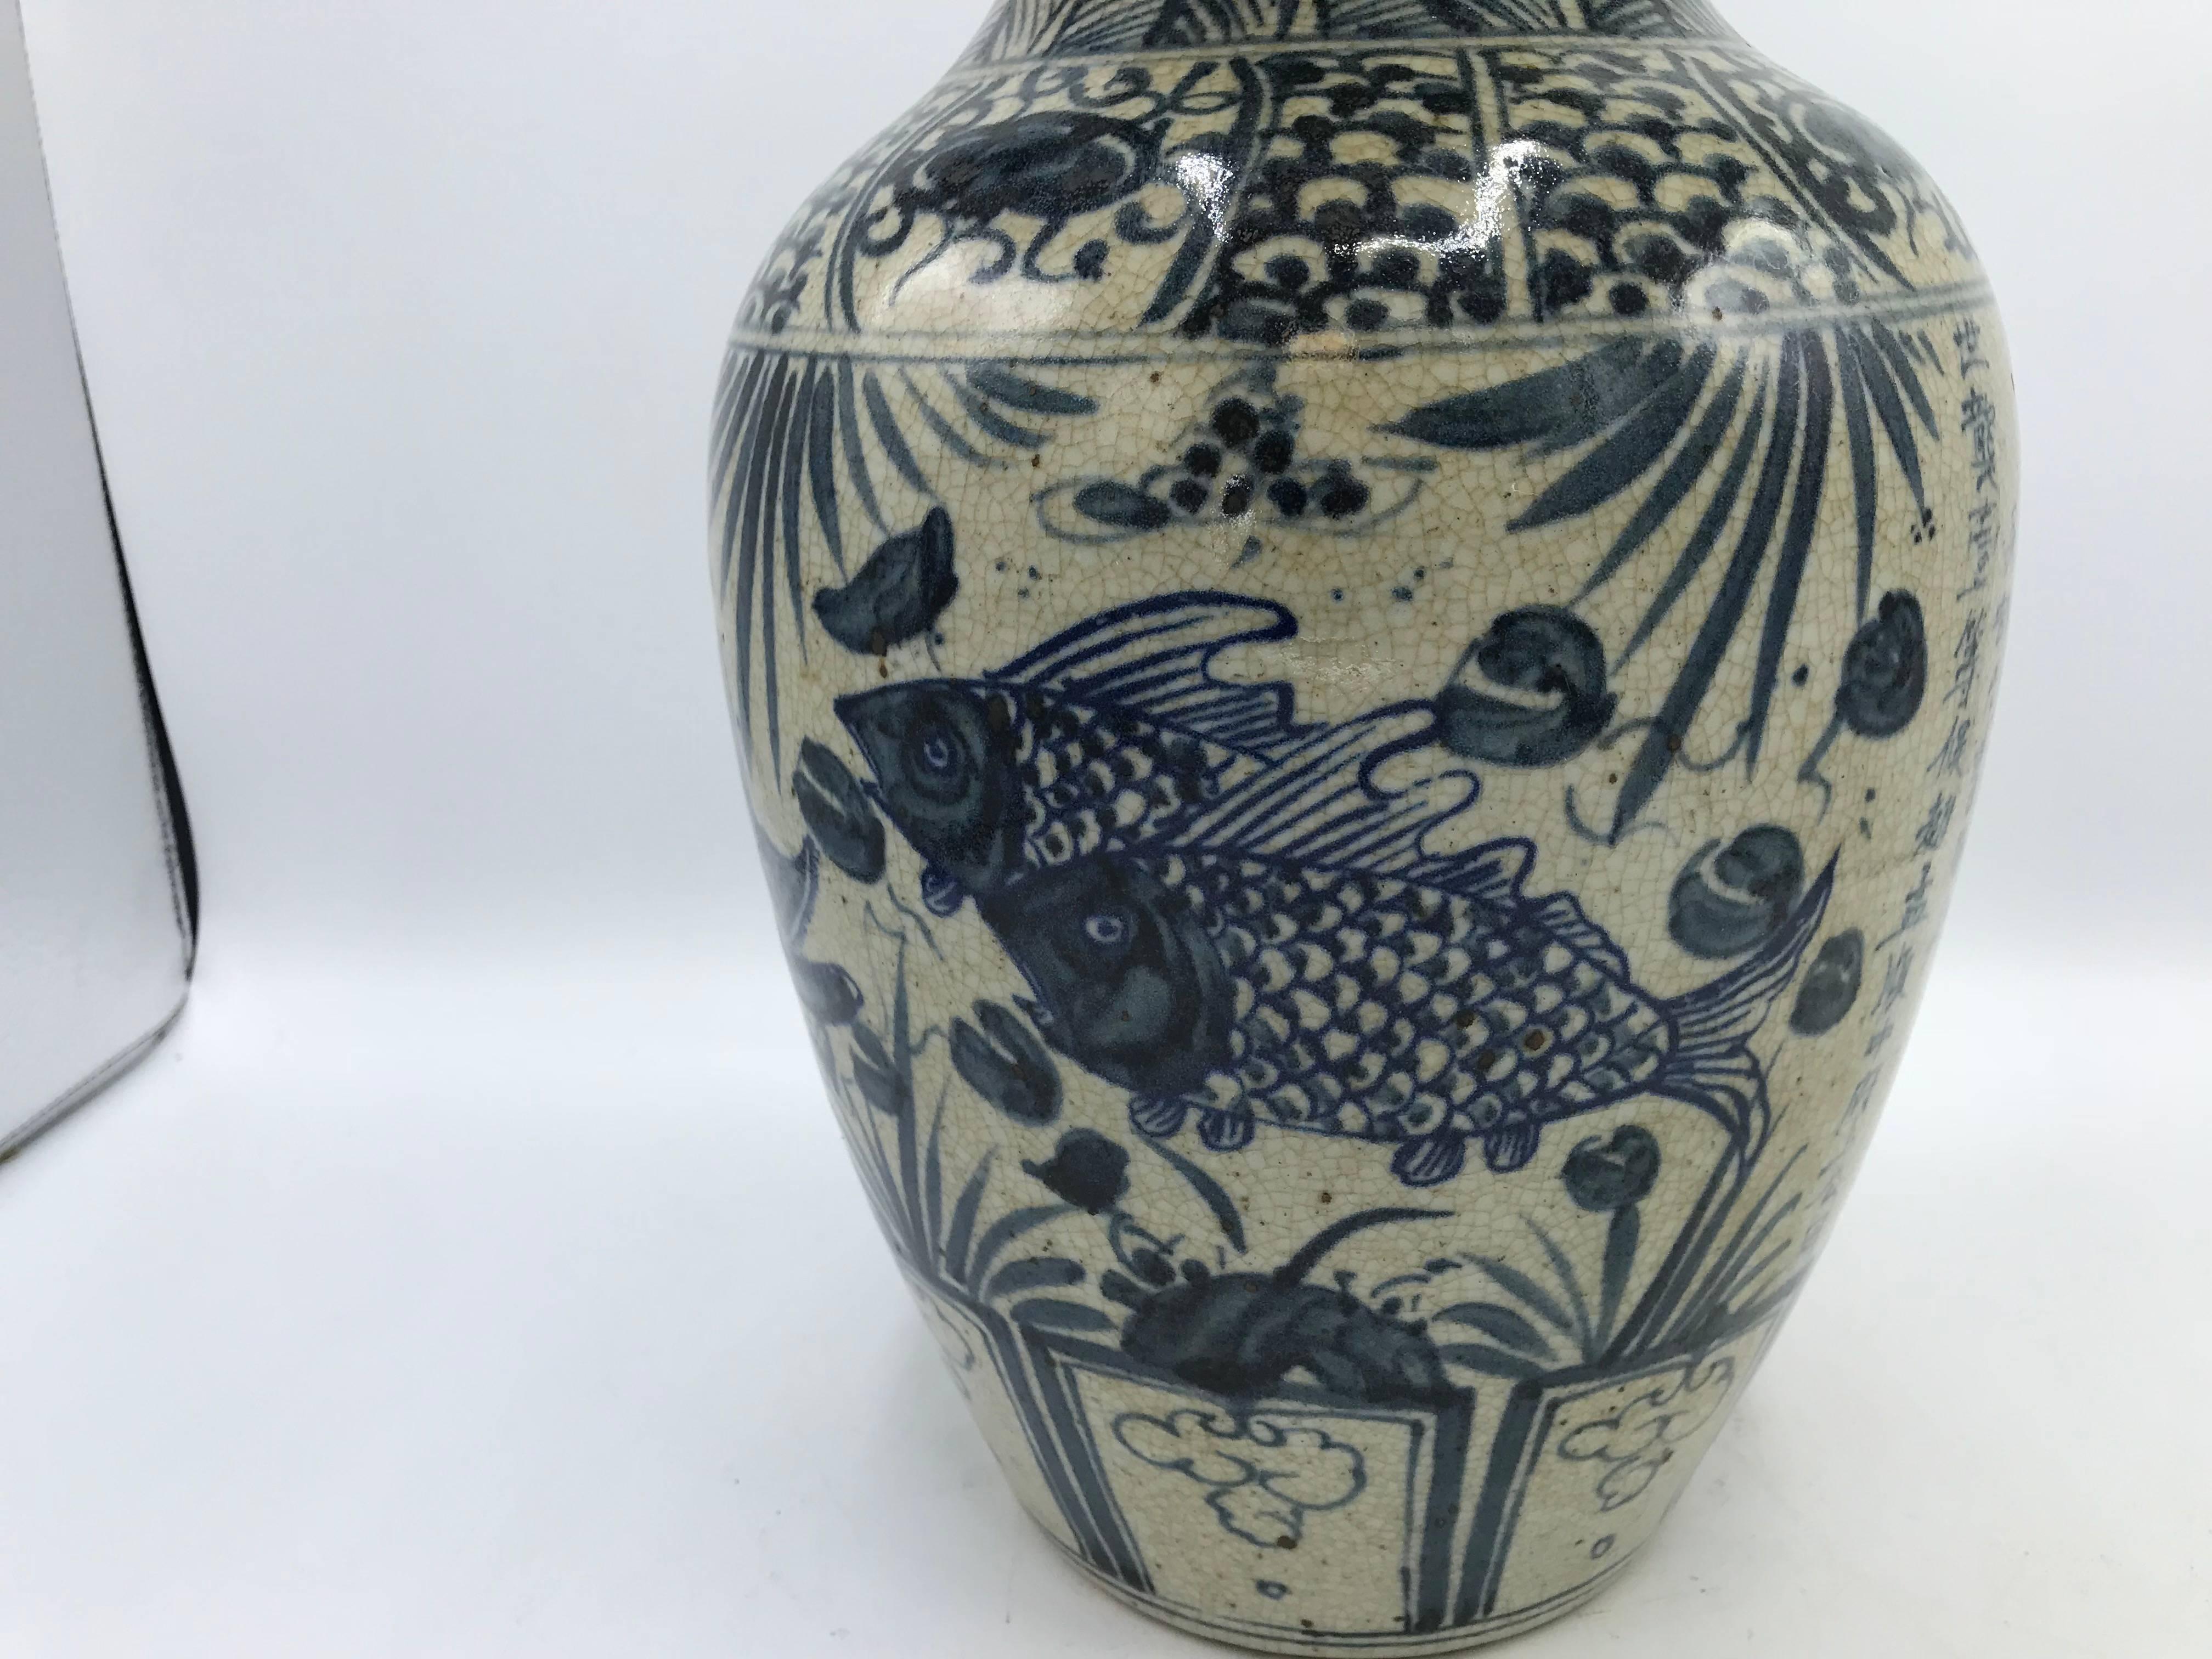 Blue and White Vase with Fish Motif and Calligraphy 1